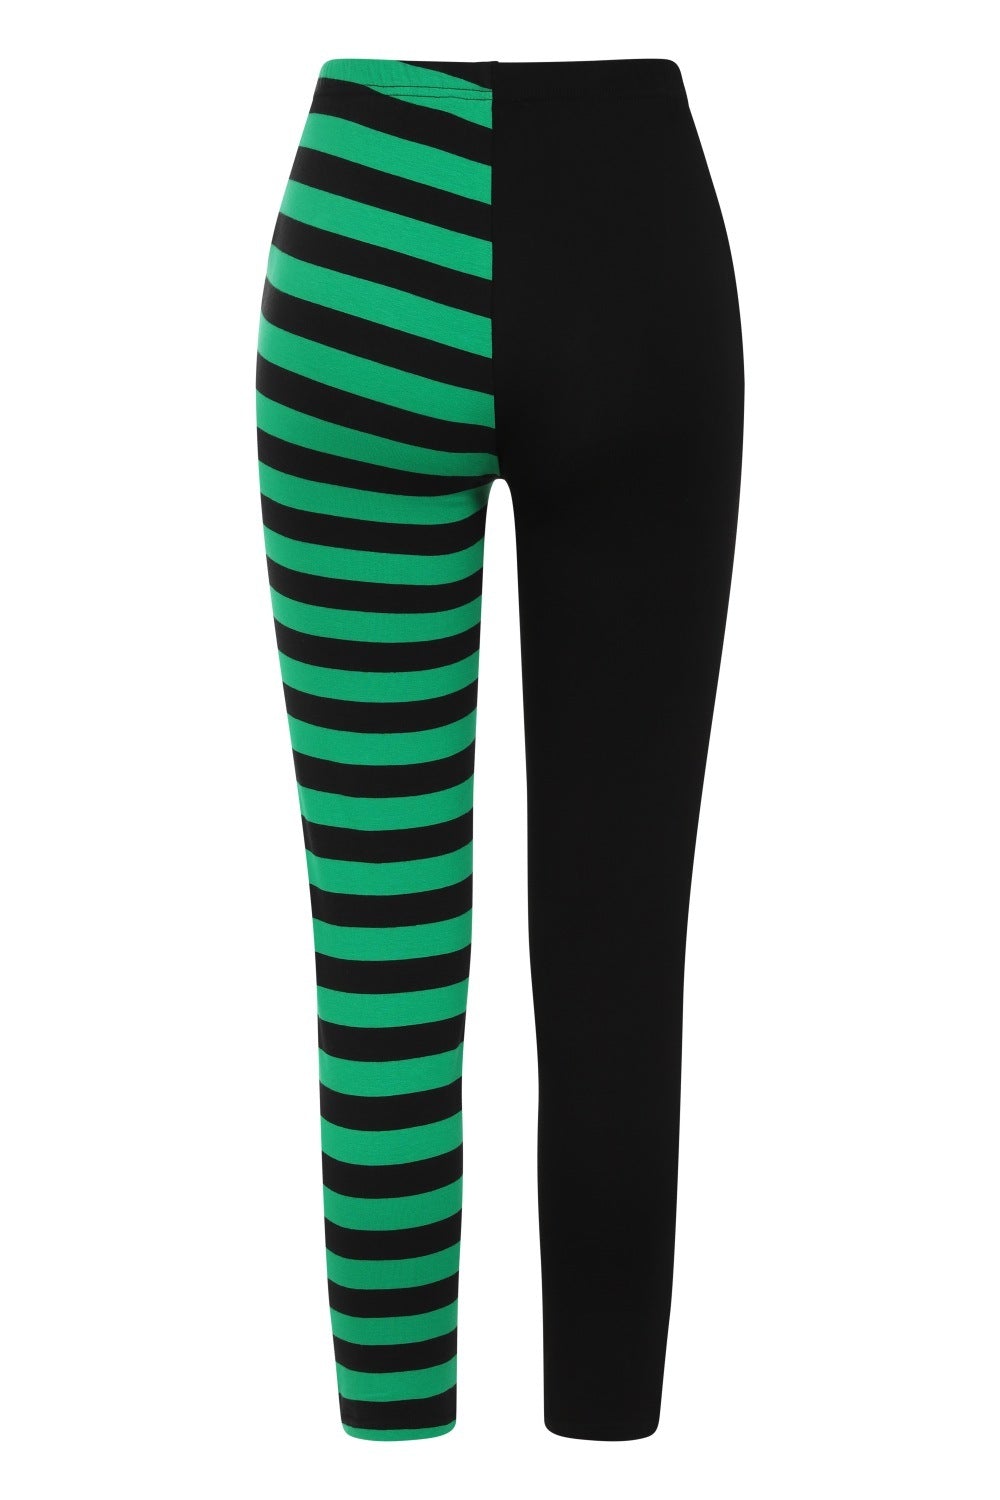 Back of High waisted leggings with one black leg and one green striped leg. 